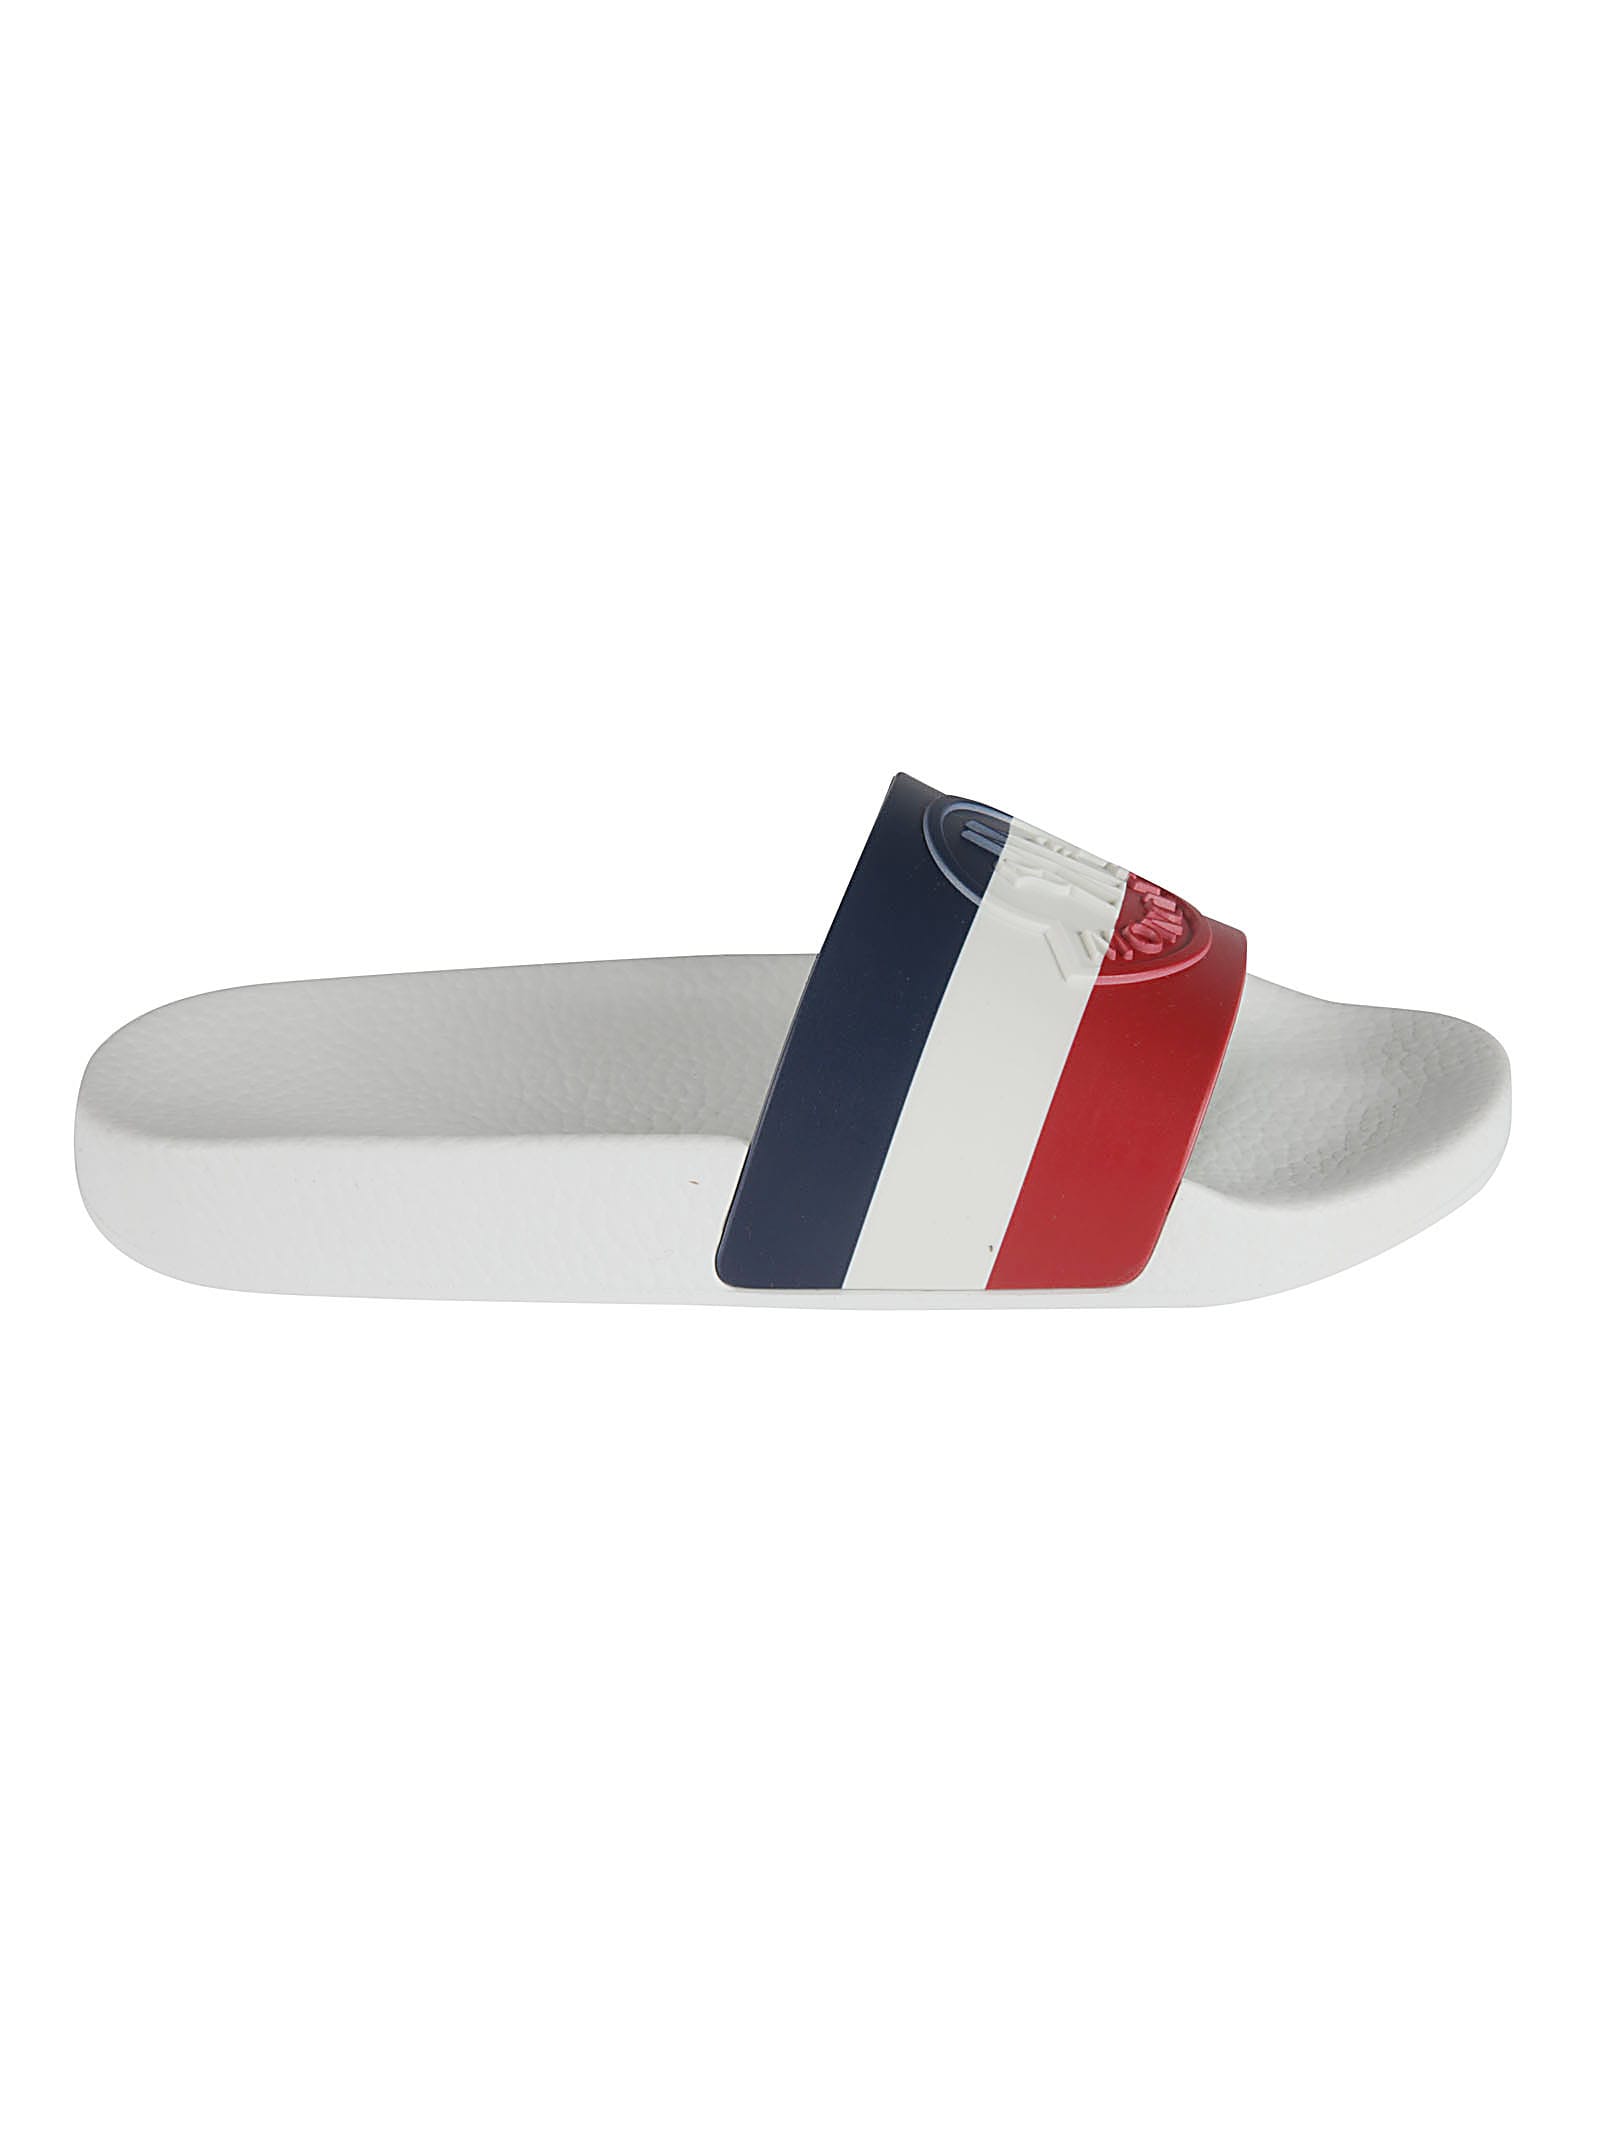 Buy Moncler Jeanne Sliders online, shop Moncler shoes with free shipping